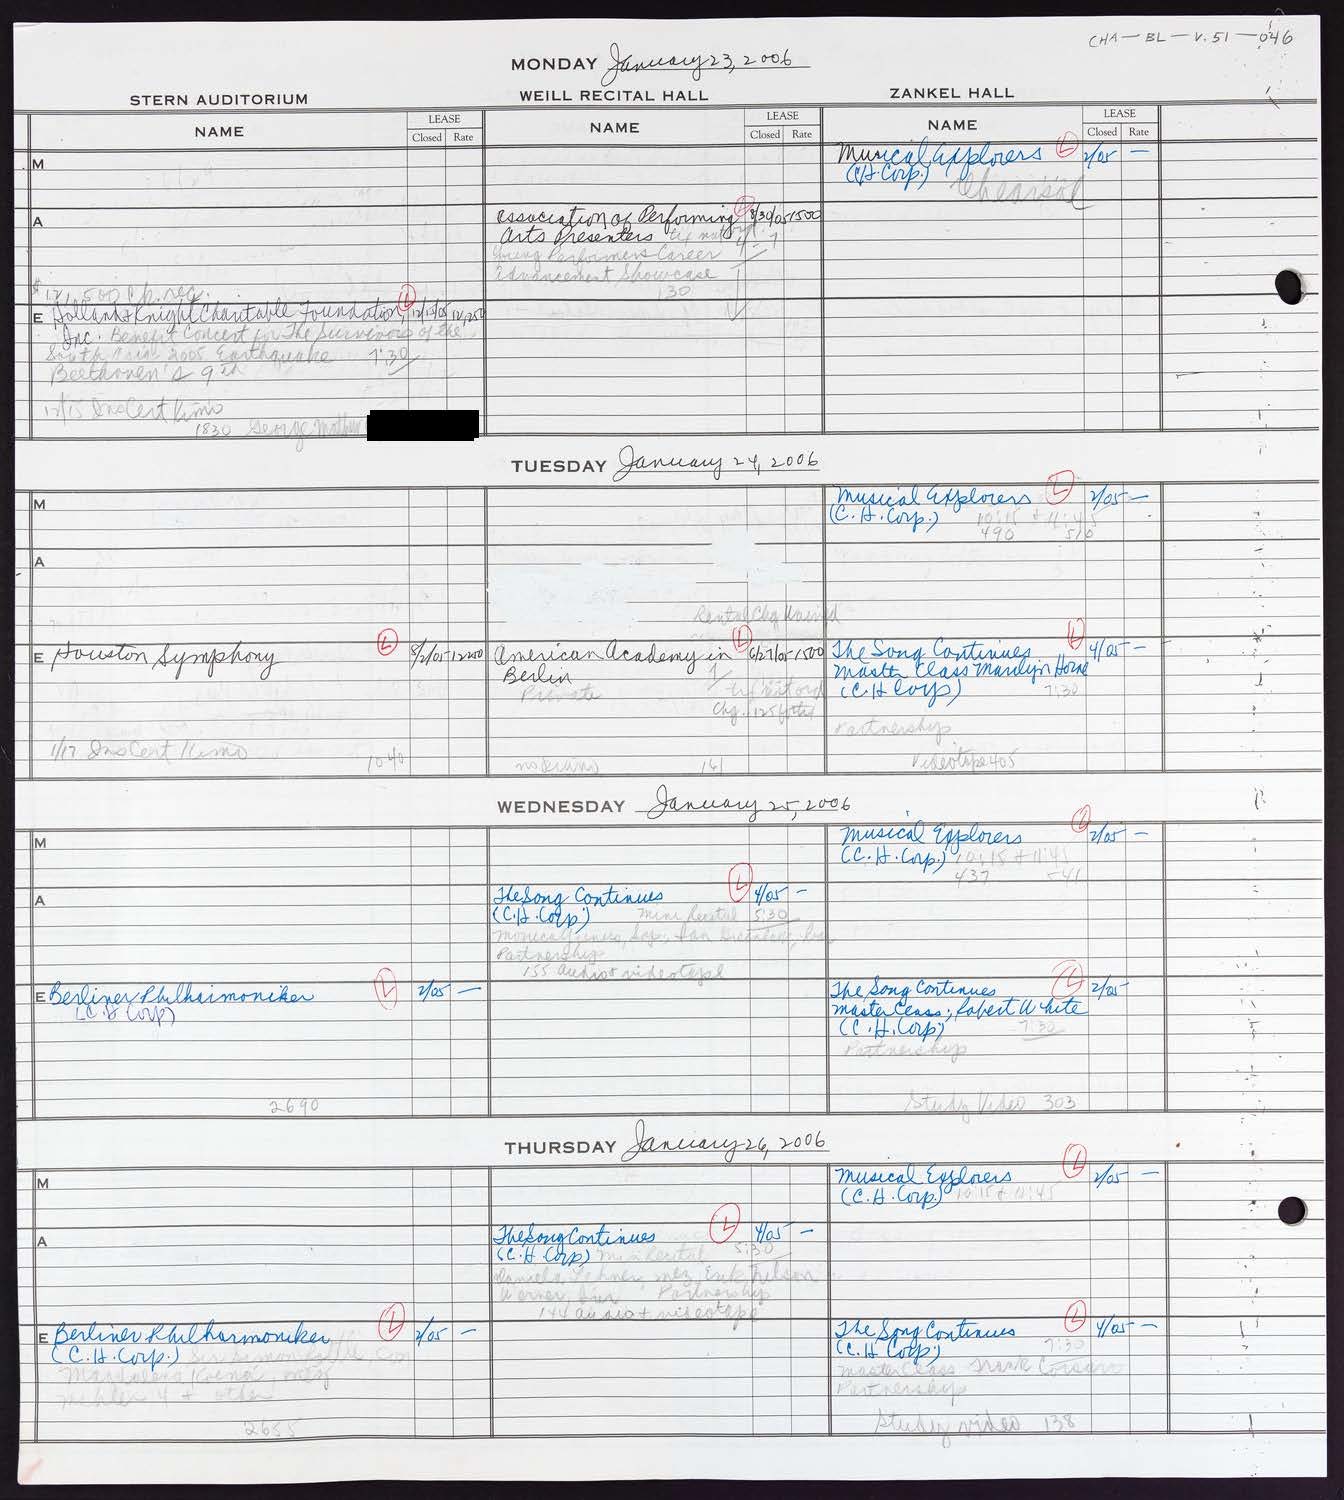 Carnegie Hall Booking Ledger, volume 51, page 46